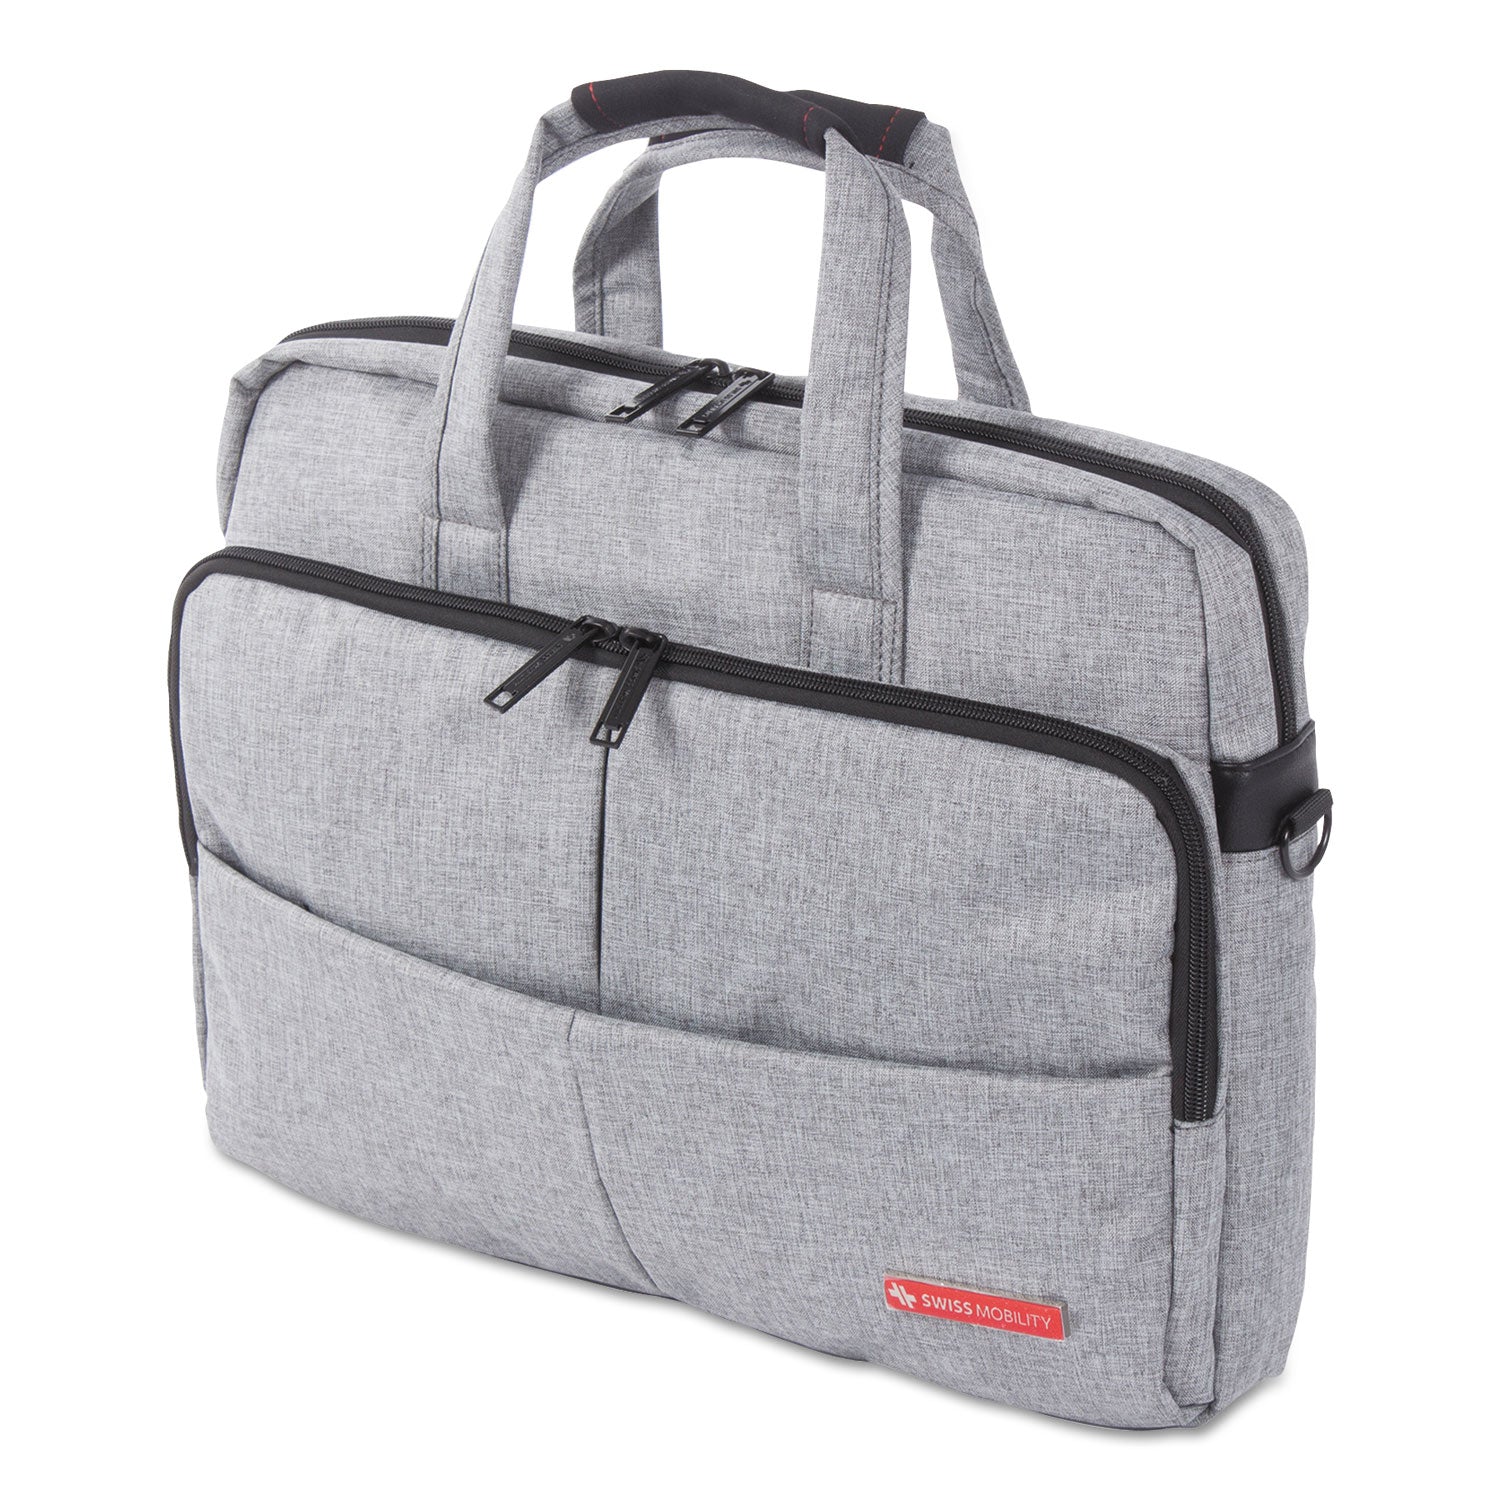 sterling-slim-briefcase-fits-devices-up-to-156-polyester-3-x-3-x-1175-gray_swzexb1068smgry - 1